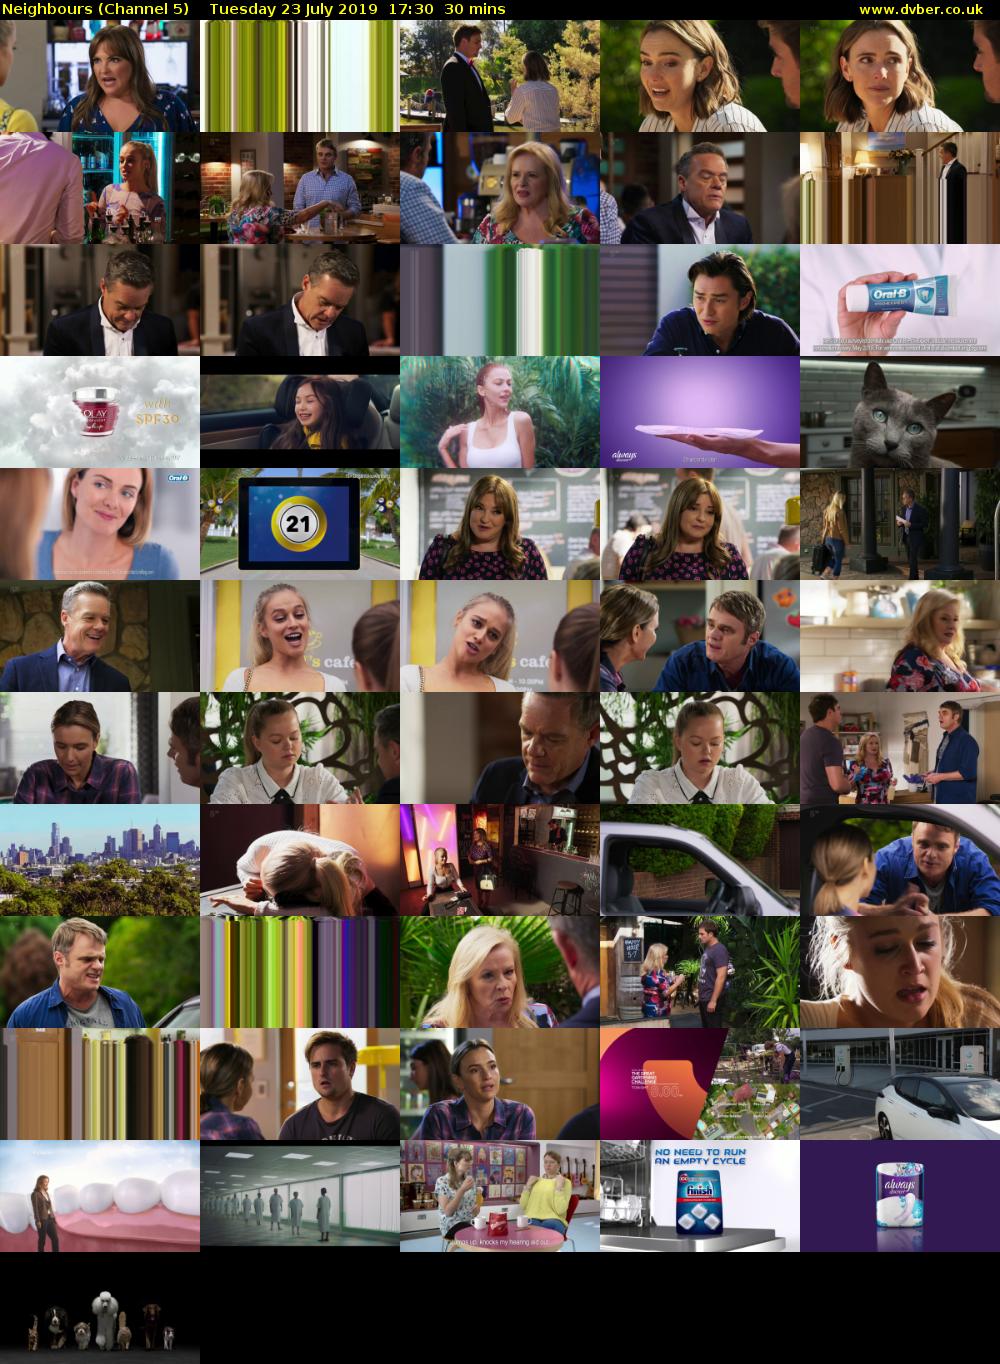 Neighbours (Channel 5) Tuesday 23 July 2019 17:30 - 18:00